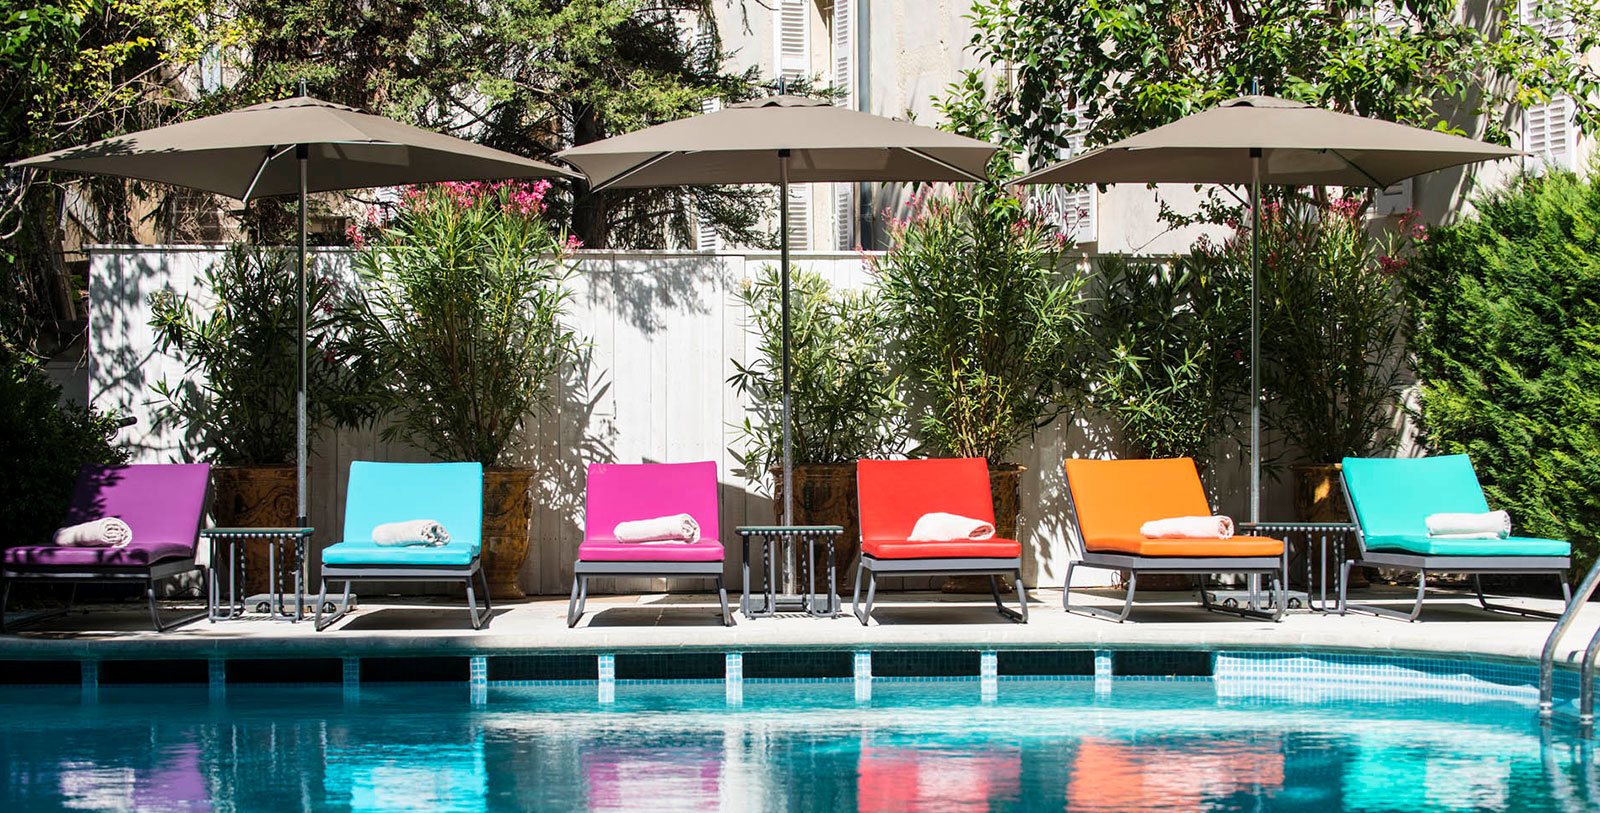 Experience a relaxing day reclining poolside and basking in the warm, Mediterranean sun.